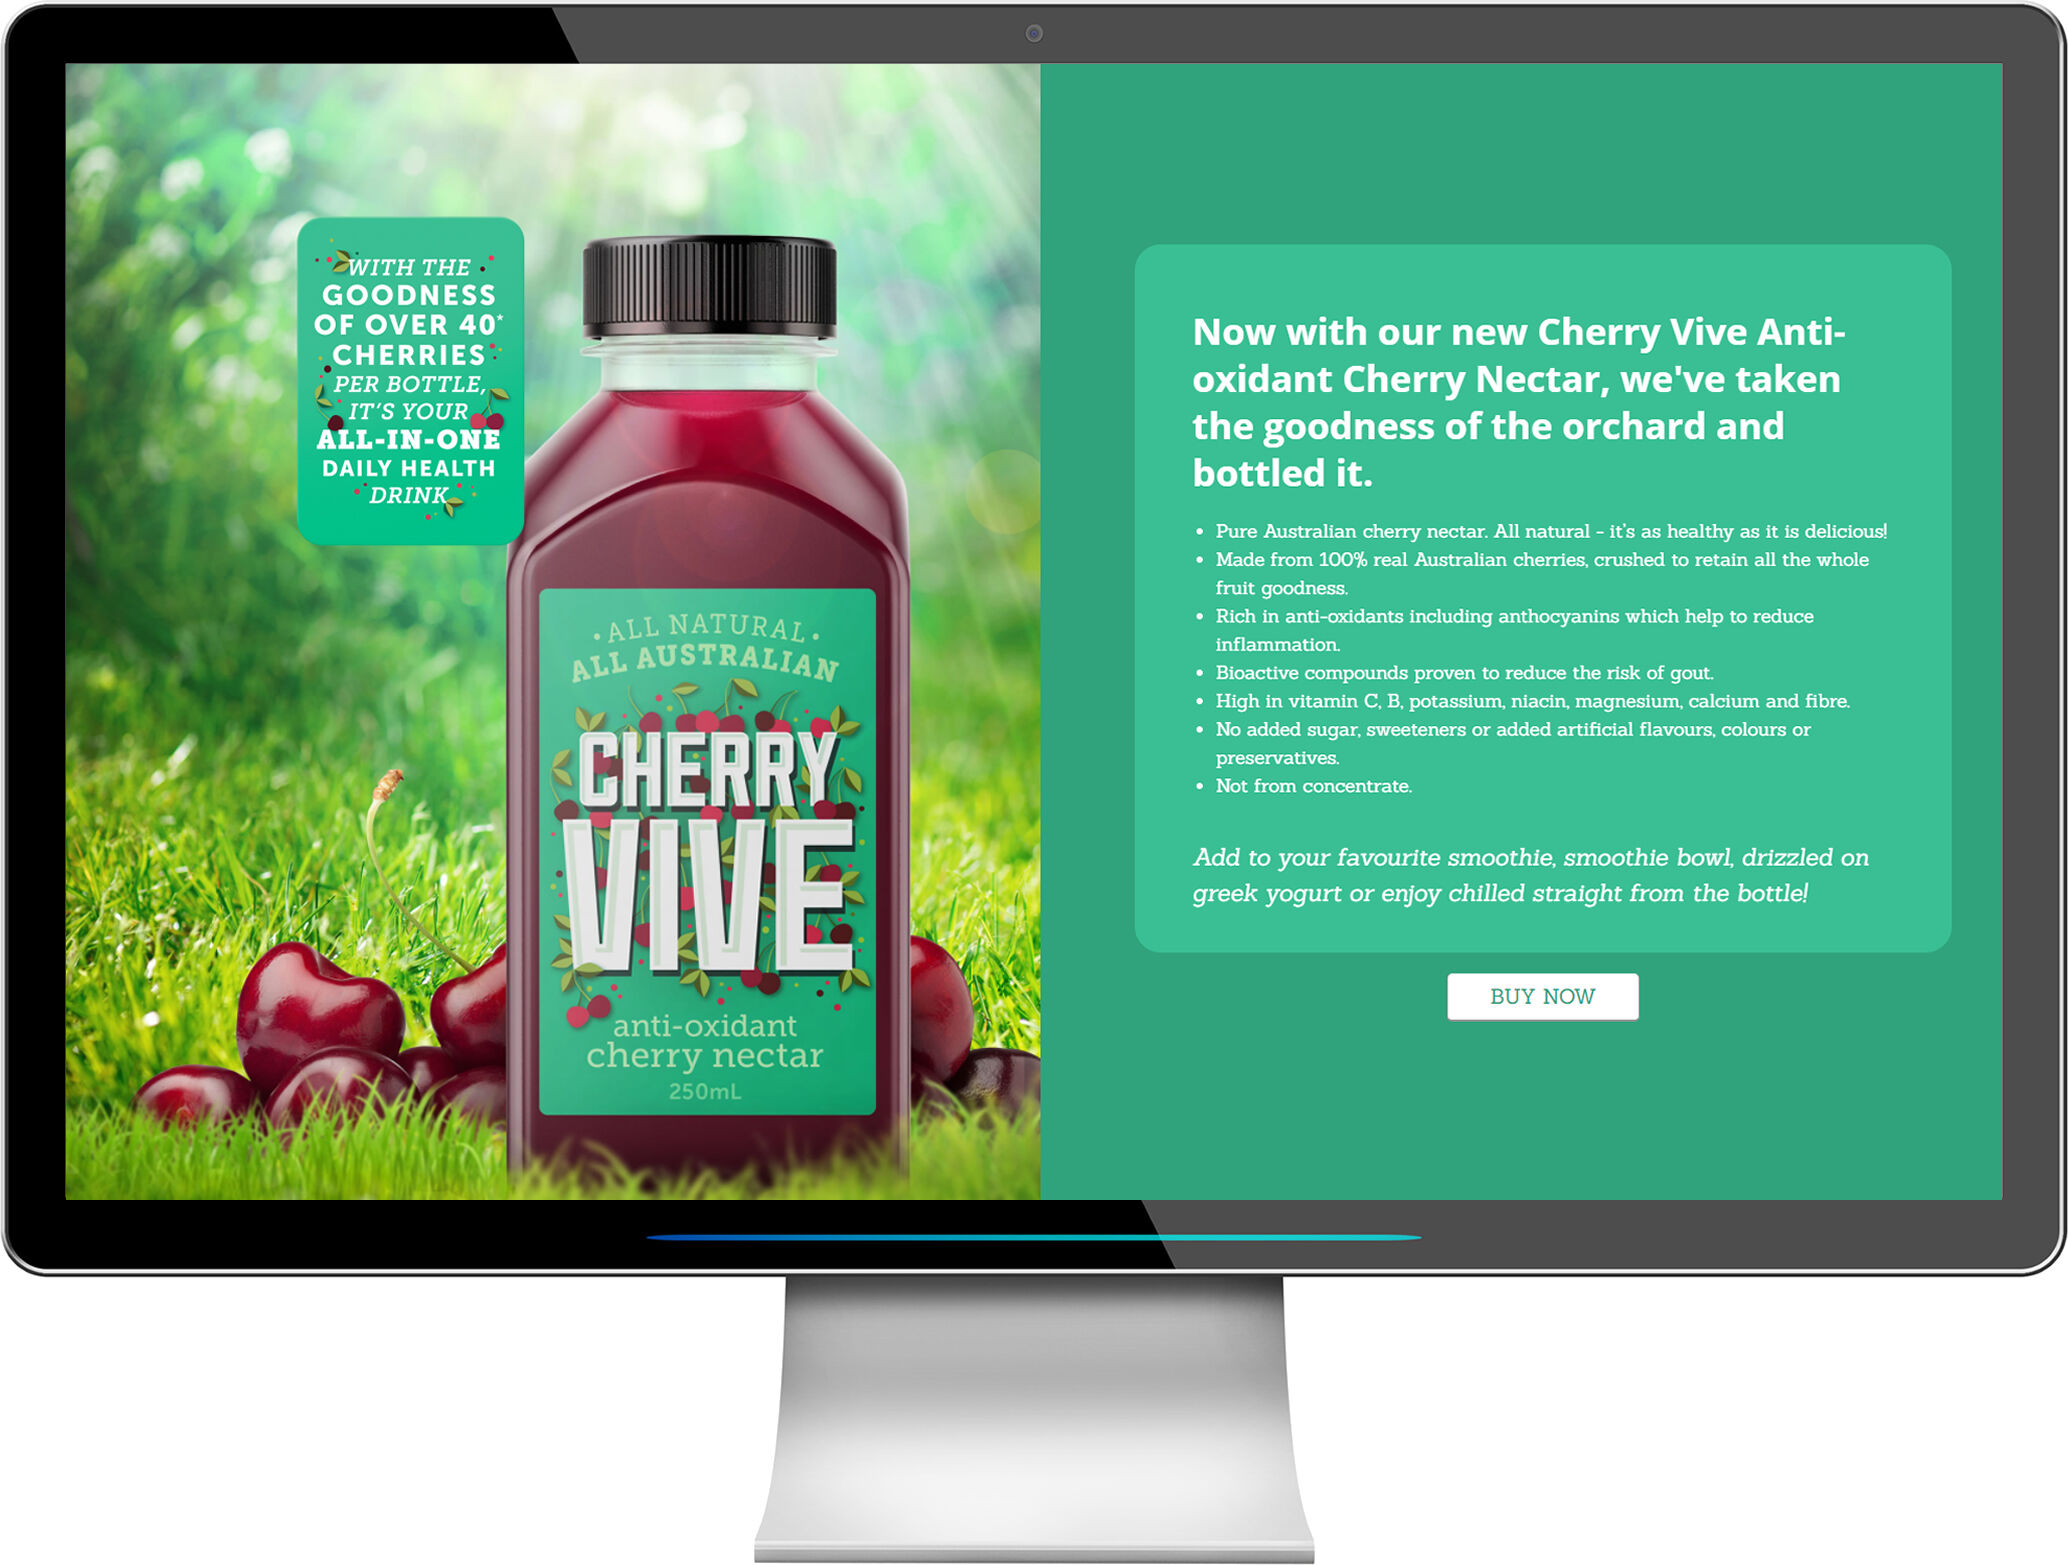 Cherry Vive - Cherry Nectar, Pure Australian cherry nectar. All natural - it’s as healthy as it is delicious!